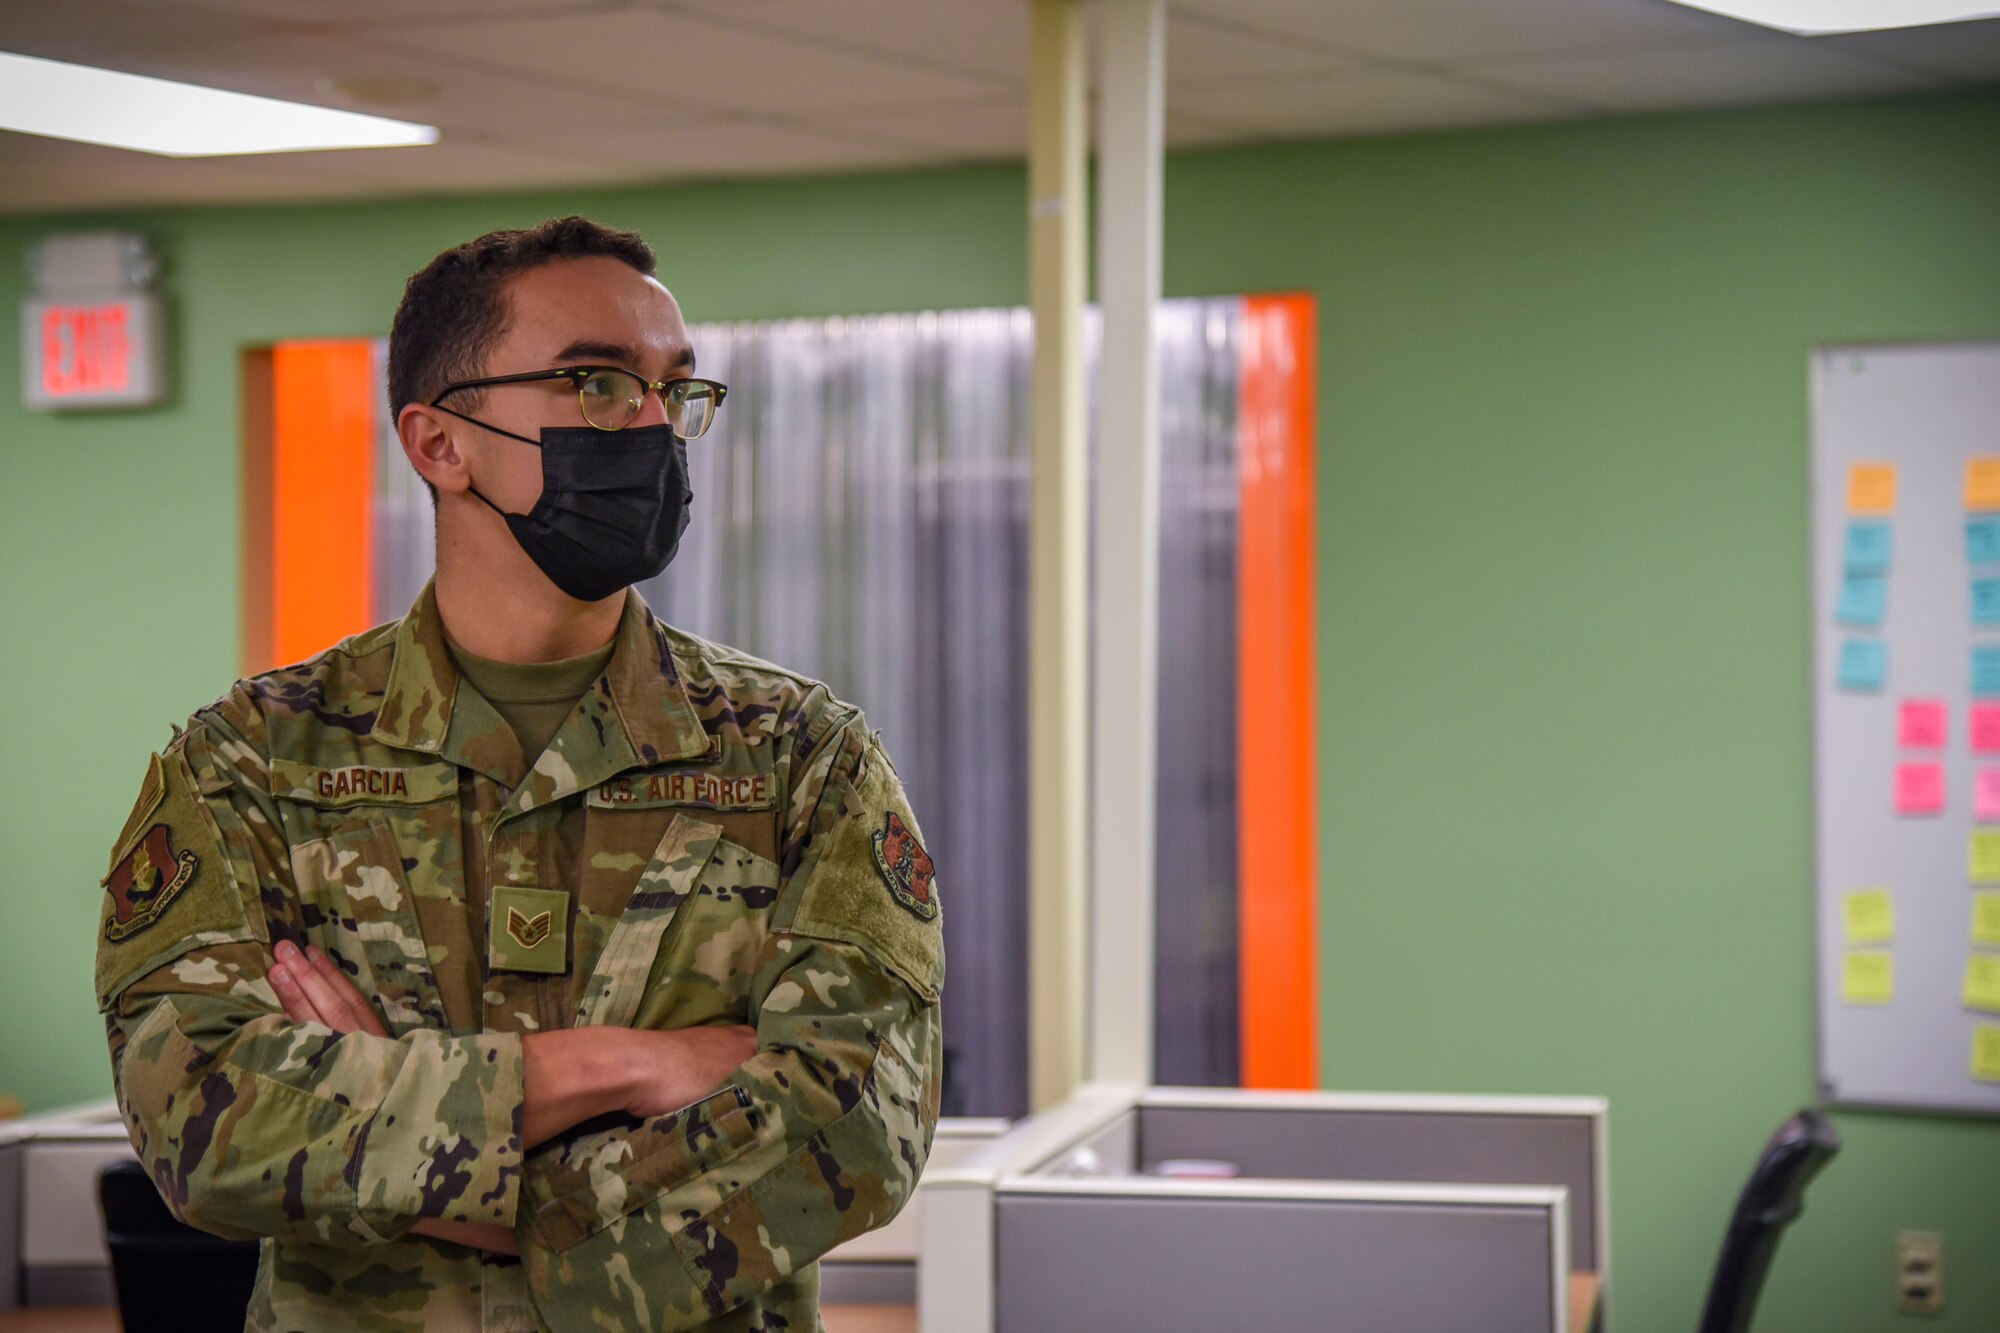 Staff Sgt. Eric Garcia, mission defense team member, 108th Communications Flight/ MDT, stands in the MDT work area and explains further the demand for cybersecurity professionals.